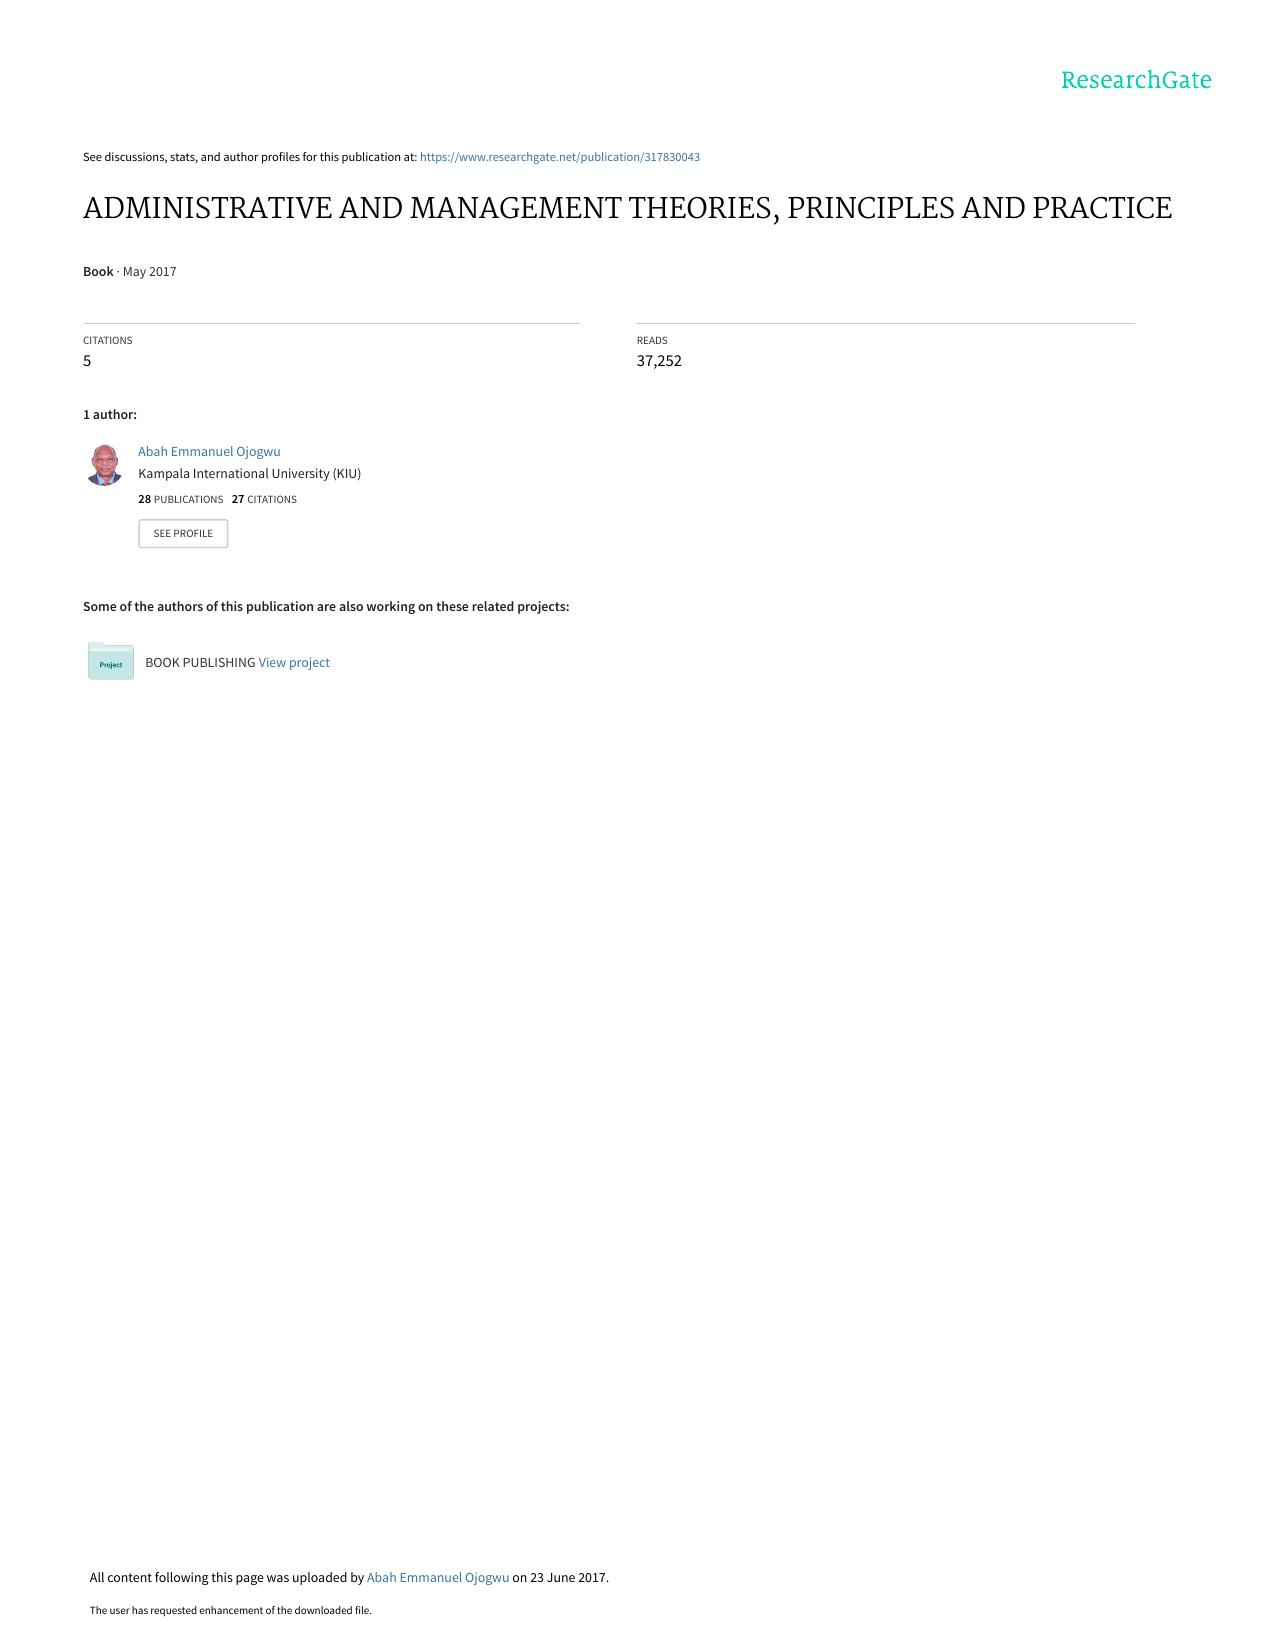 Theories and Principles of Administration 2017